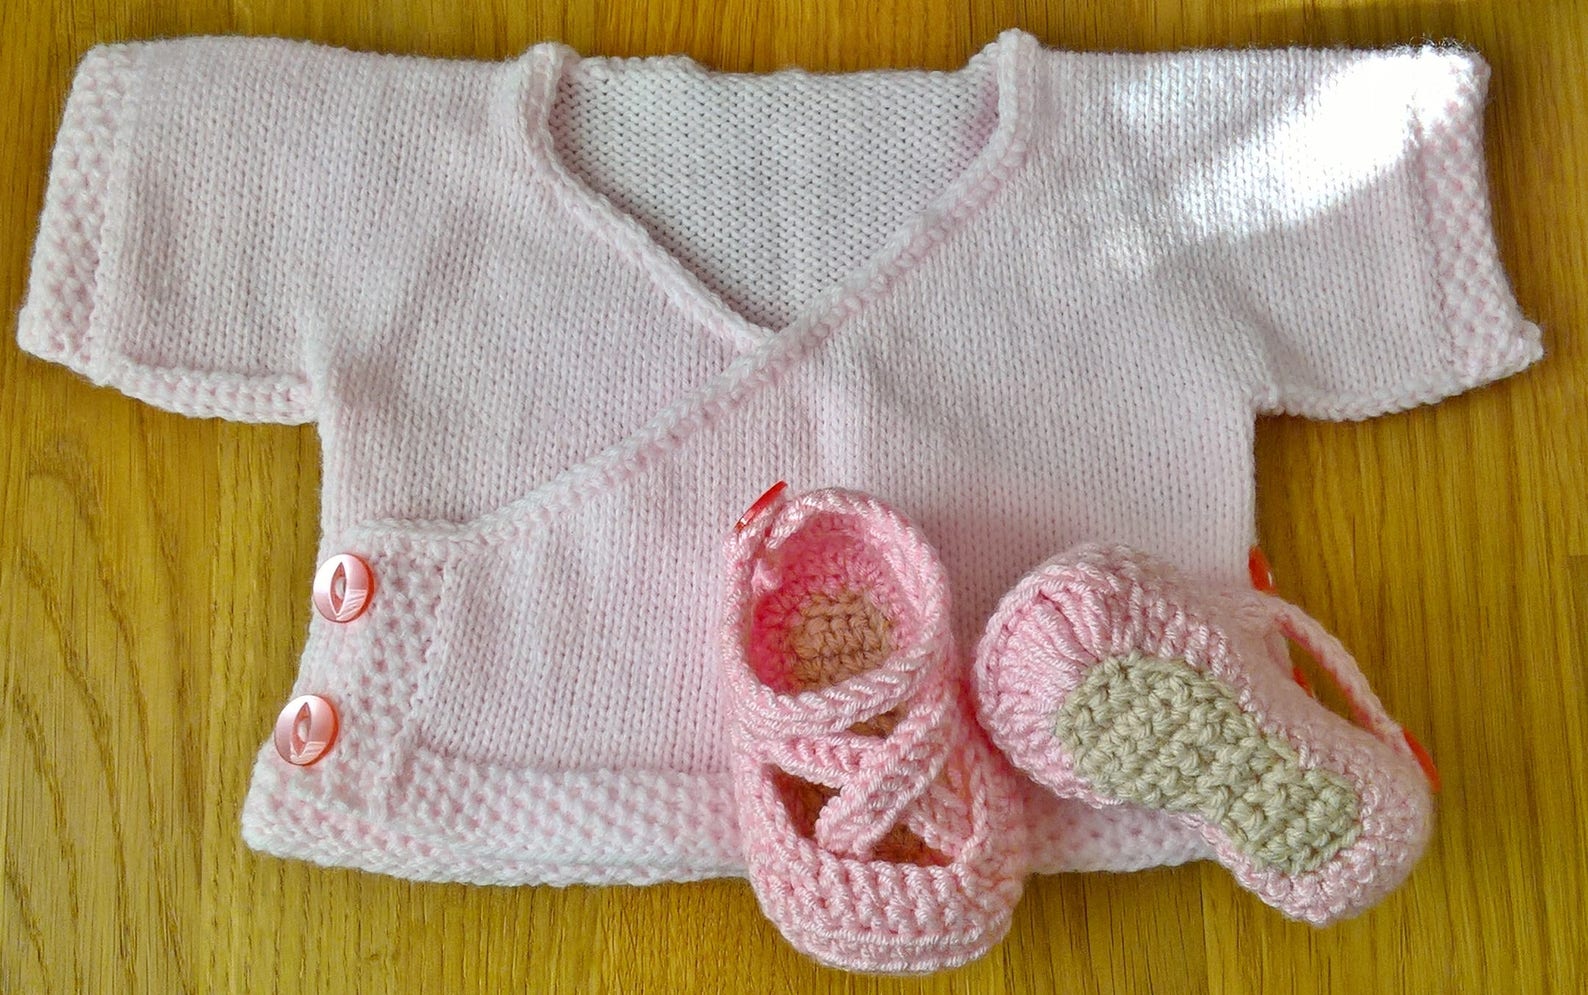 baby ballet wrap and shoes/ baby girl birthday gift/ ballet cardigan and shoes/ baby gift set/ baby knitwear gift/ crochet balle